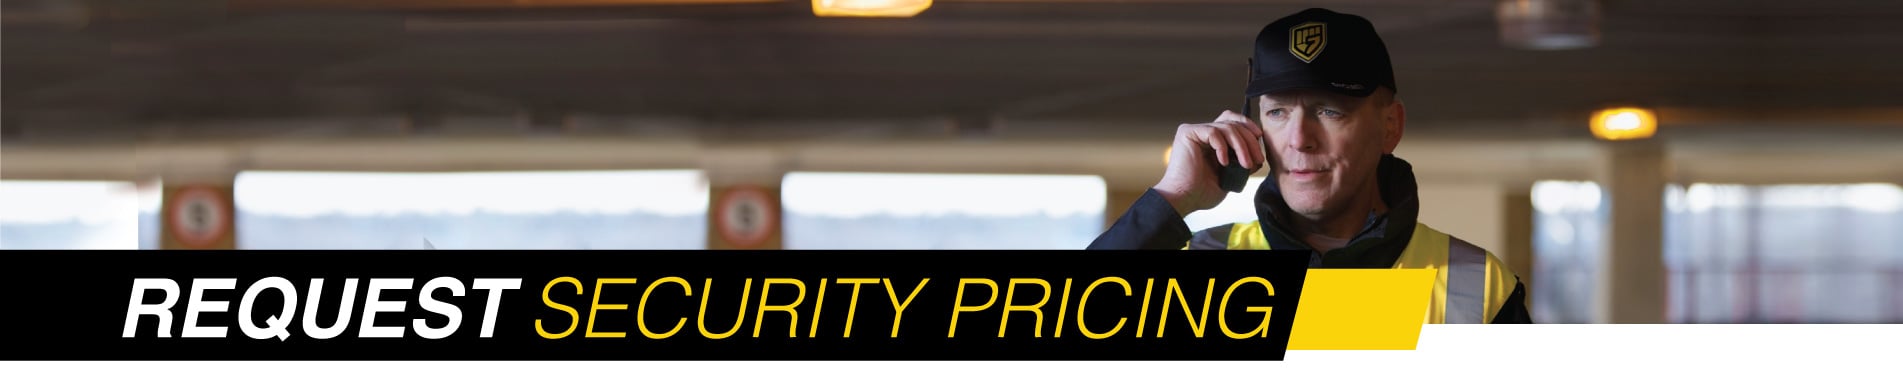 Request Houston Area Security Pricing